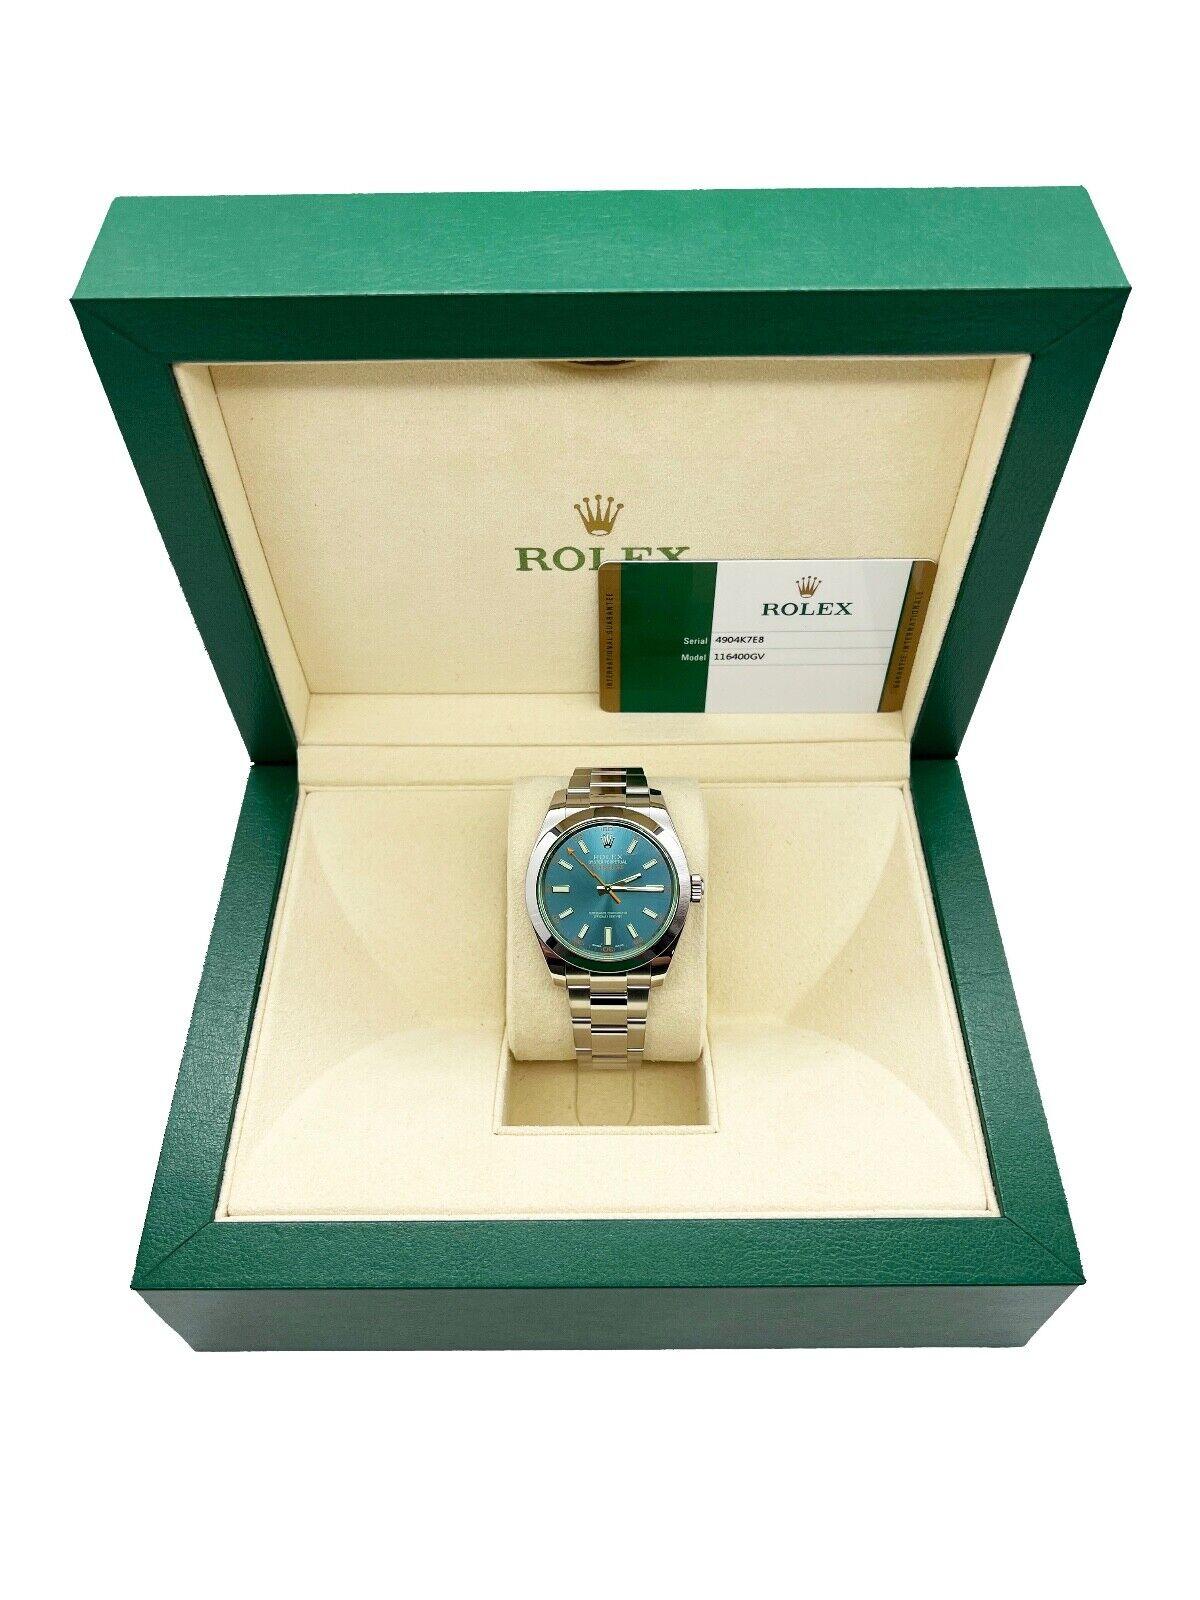 Style Number: 116400GV

Serial: 4904K***

Year: 2016

Model: Milgauss

Case Material: Stainless Steel

Band: Stainless Steel

Bezel: Stainless Steel

Dial: Blue

Face: Green Sapphire Crystal

Case Size: 40mm

Includes: 

-Rolex Box &